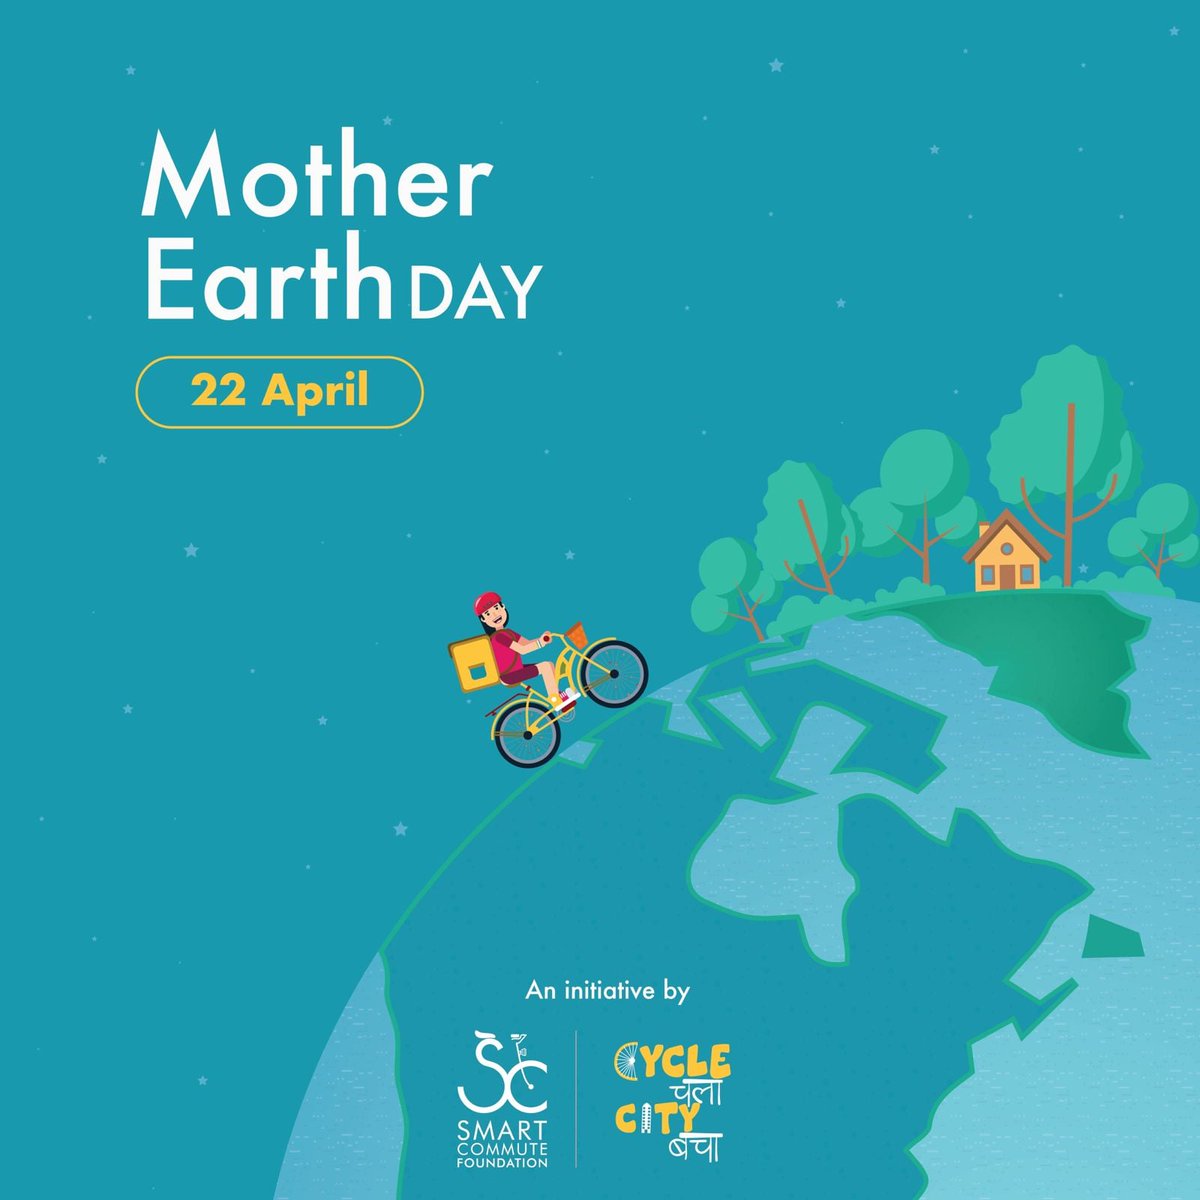 Delivering a sustainable future, one pedal at a time. Happy World Earth Day! Let's honor our Mother Earth by embracing eco-friendly modes of transportation and preserving our precious planet for generations to come. Team @CycleChalaCityB #WorldEarthDay #CycleChalaCityBacha